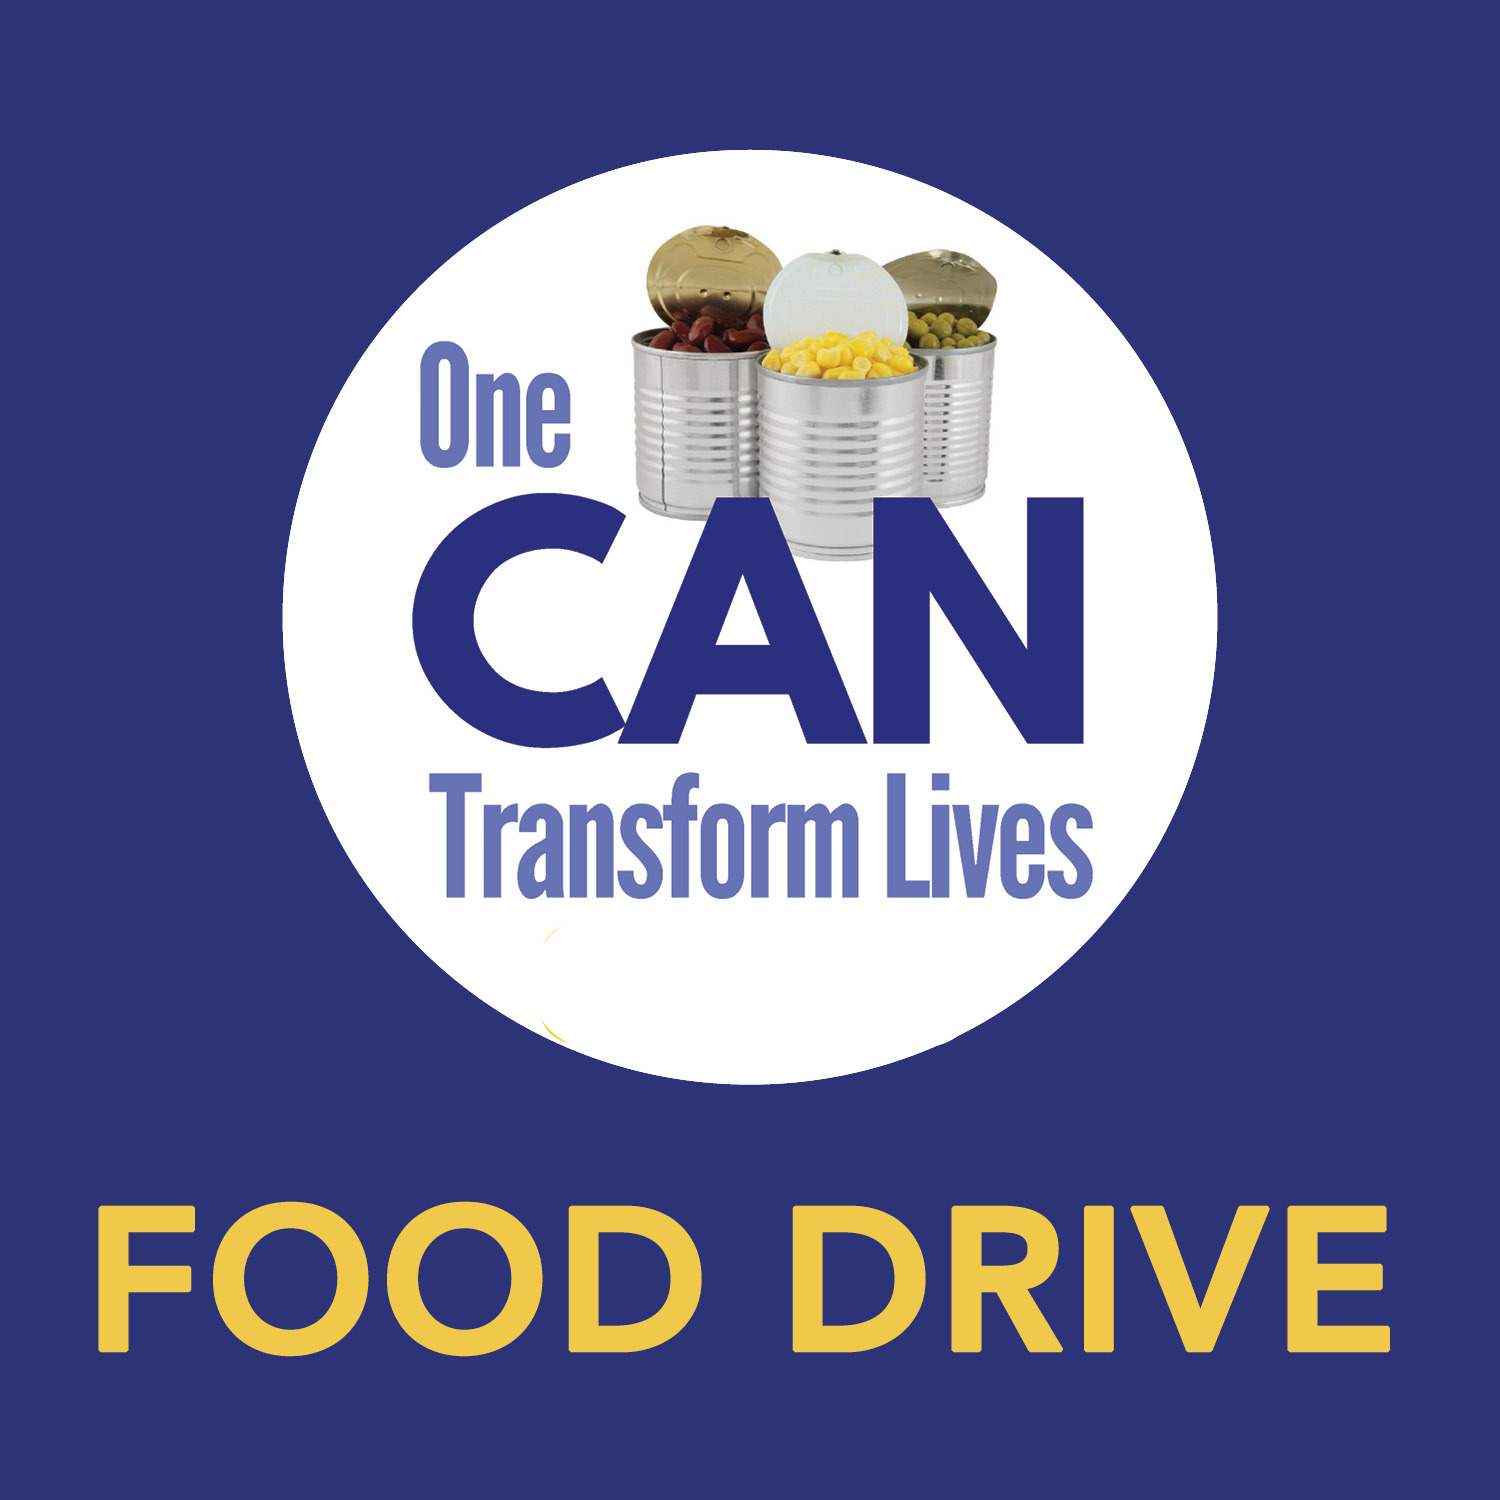 United Ministries Food Drive Underway February 12 - March 12